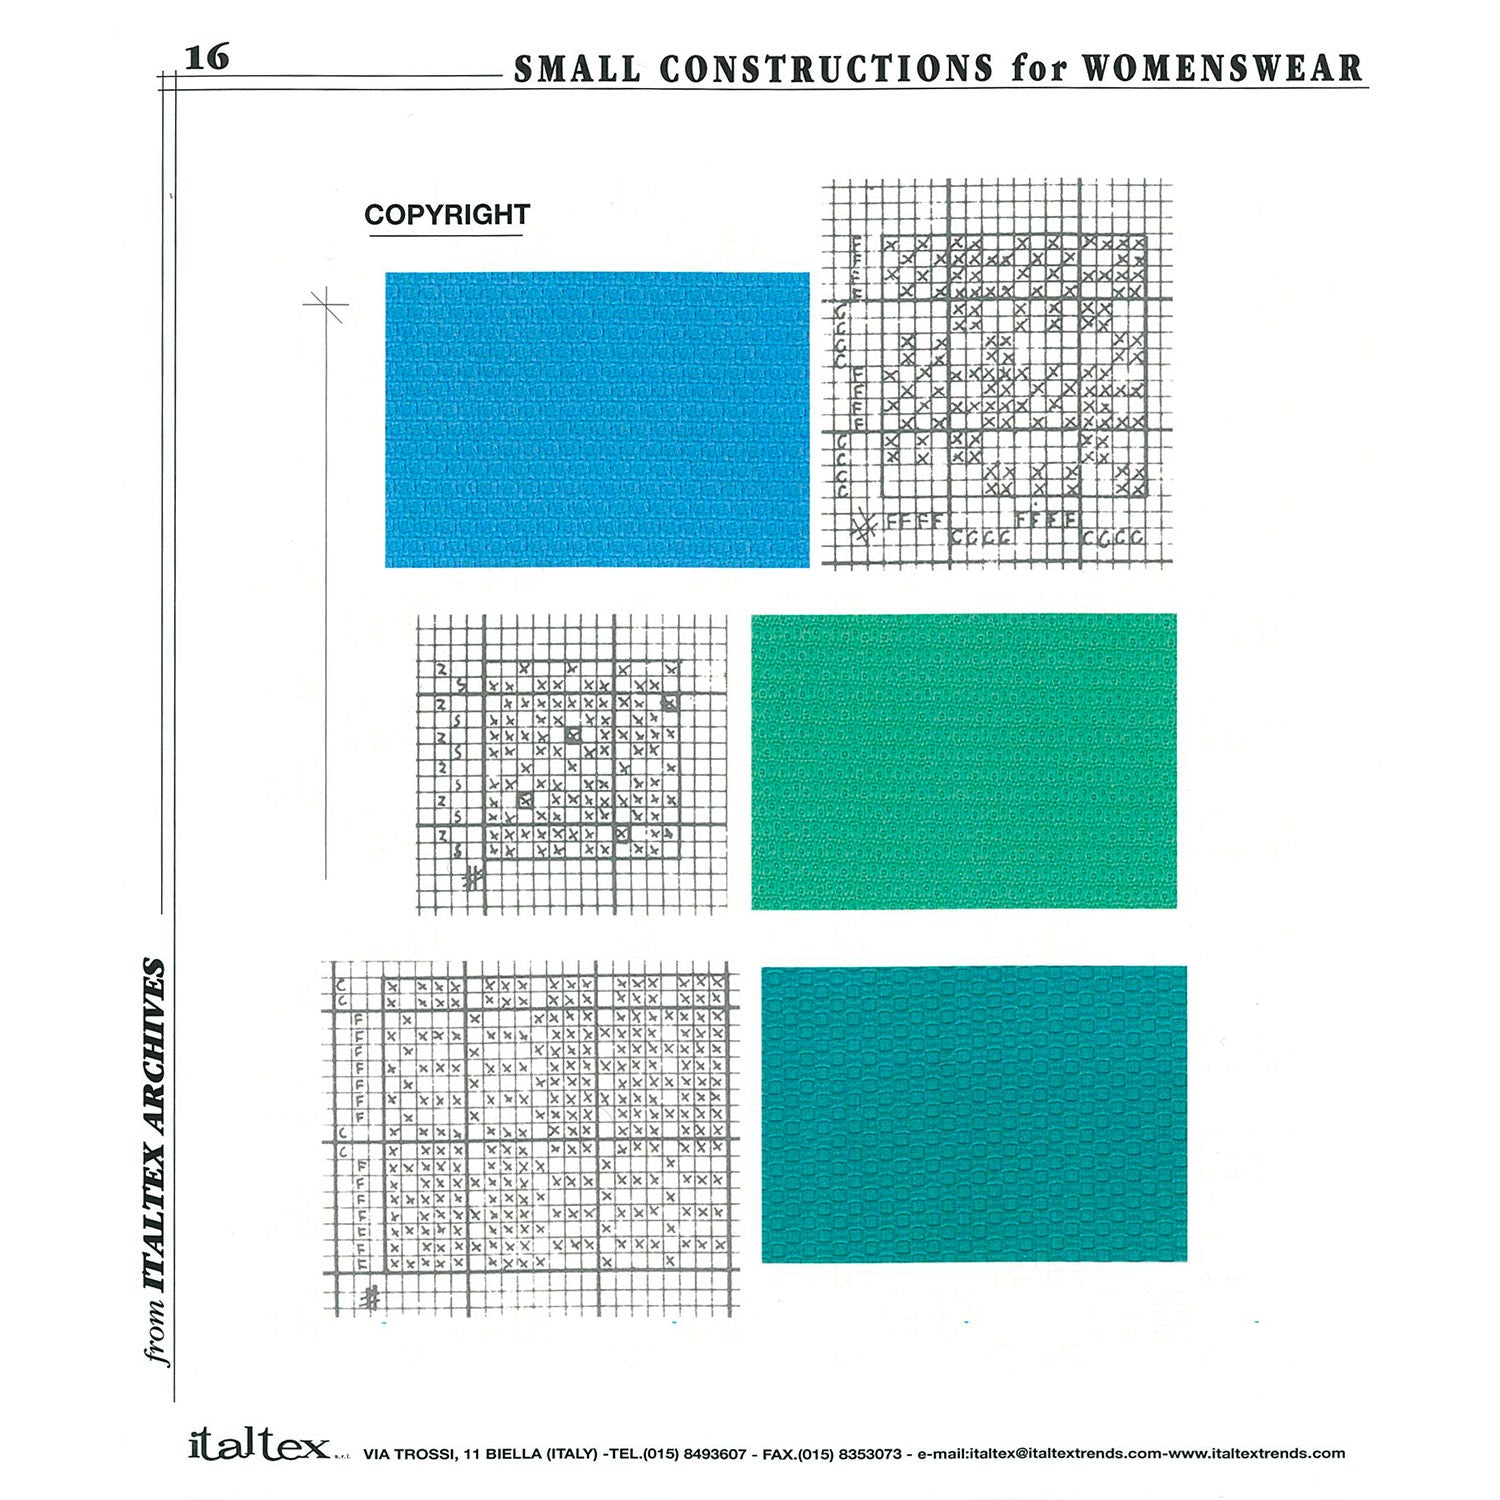 SMALL CONSTRUCTIONS for WOMENSWEAR. Vol.1